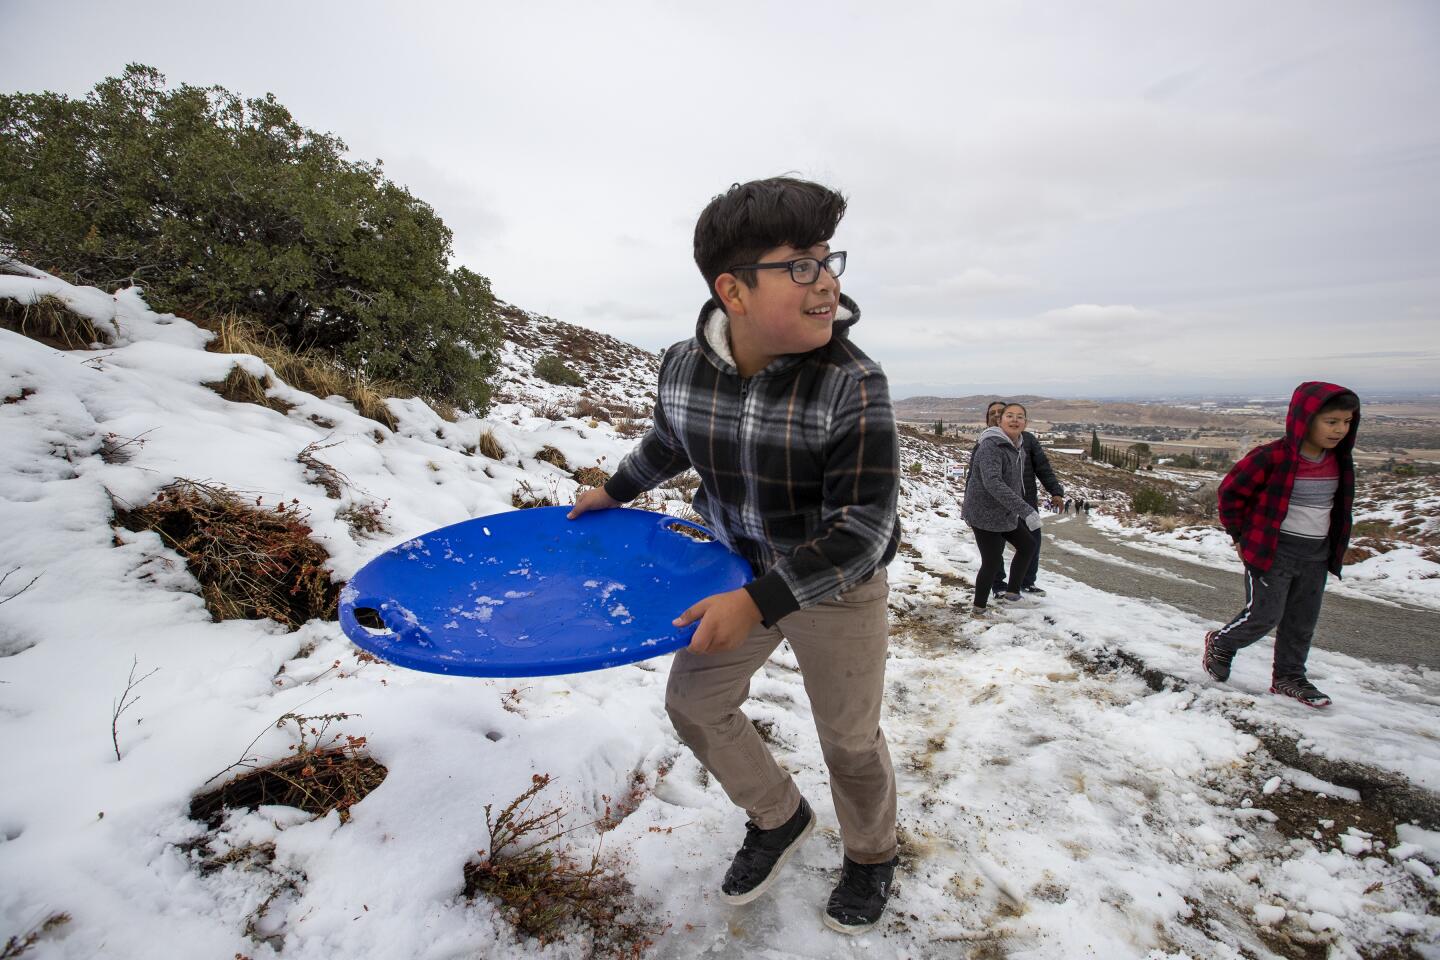 Felix Gonzalez, 10, plays in the snow lingering on Tierra Subida Ave. in the Antelope Valley town of Palmdale in Palmdale, Calif., on Dec. 1, 2019.